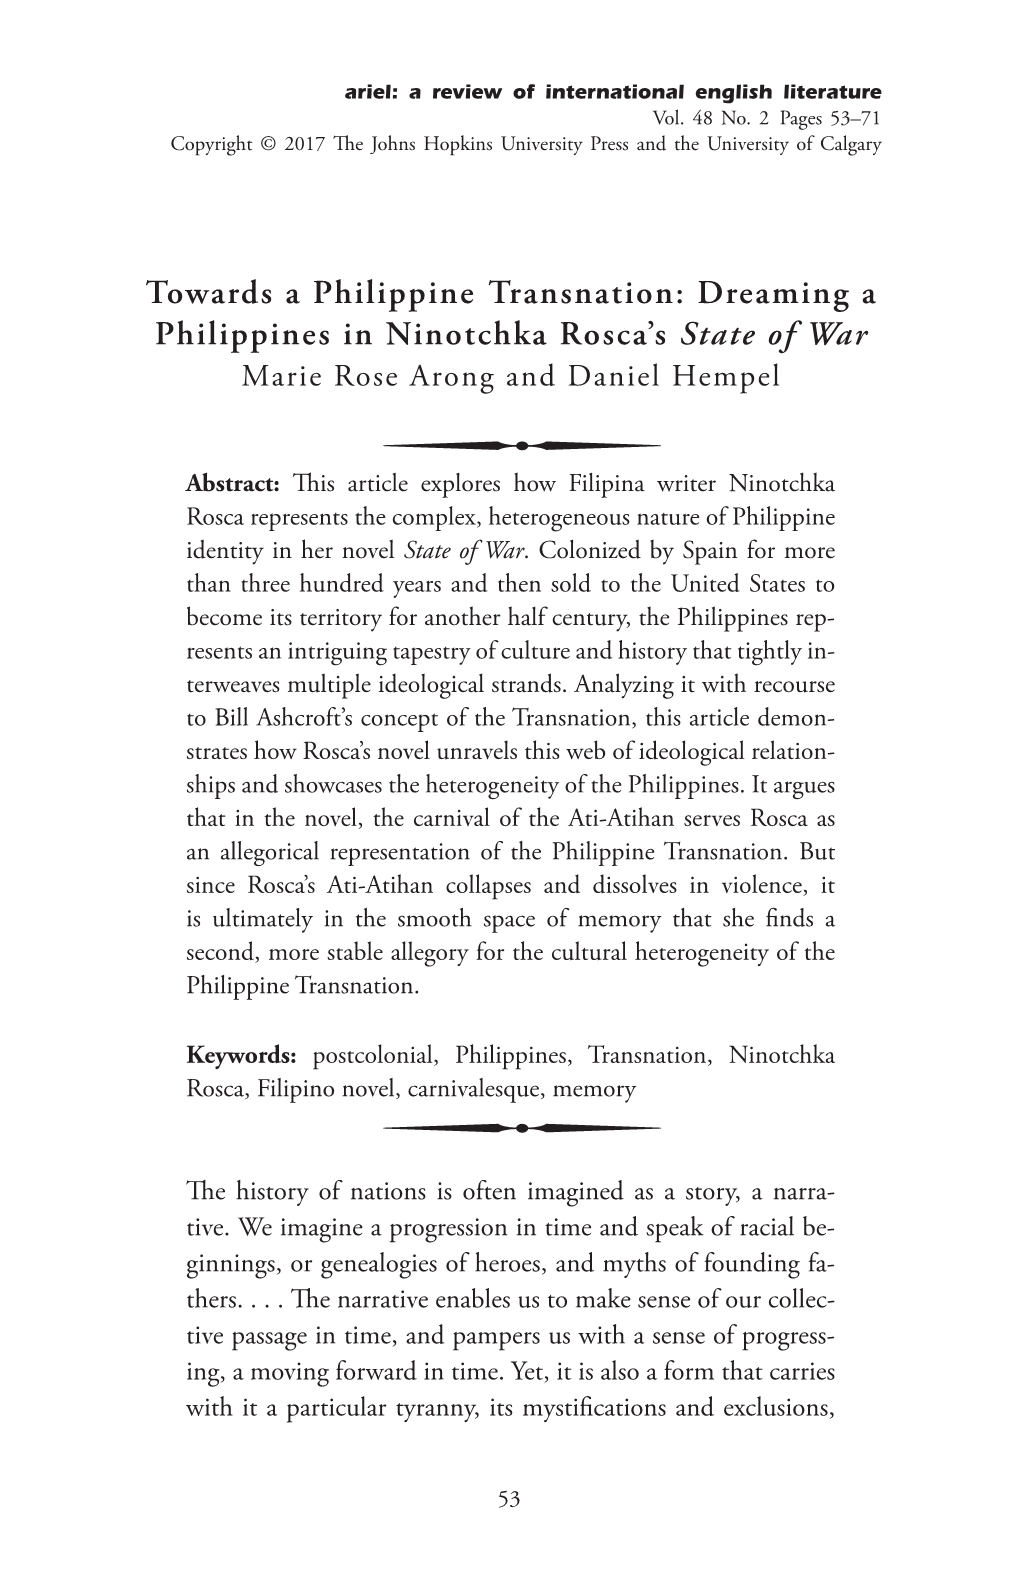 Dreaming a Philippines in Ninotchka Rosca's State Of